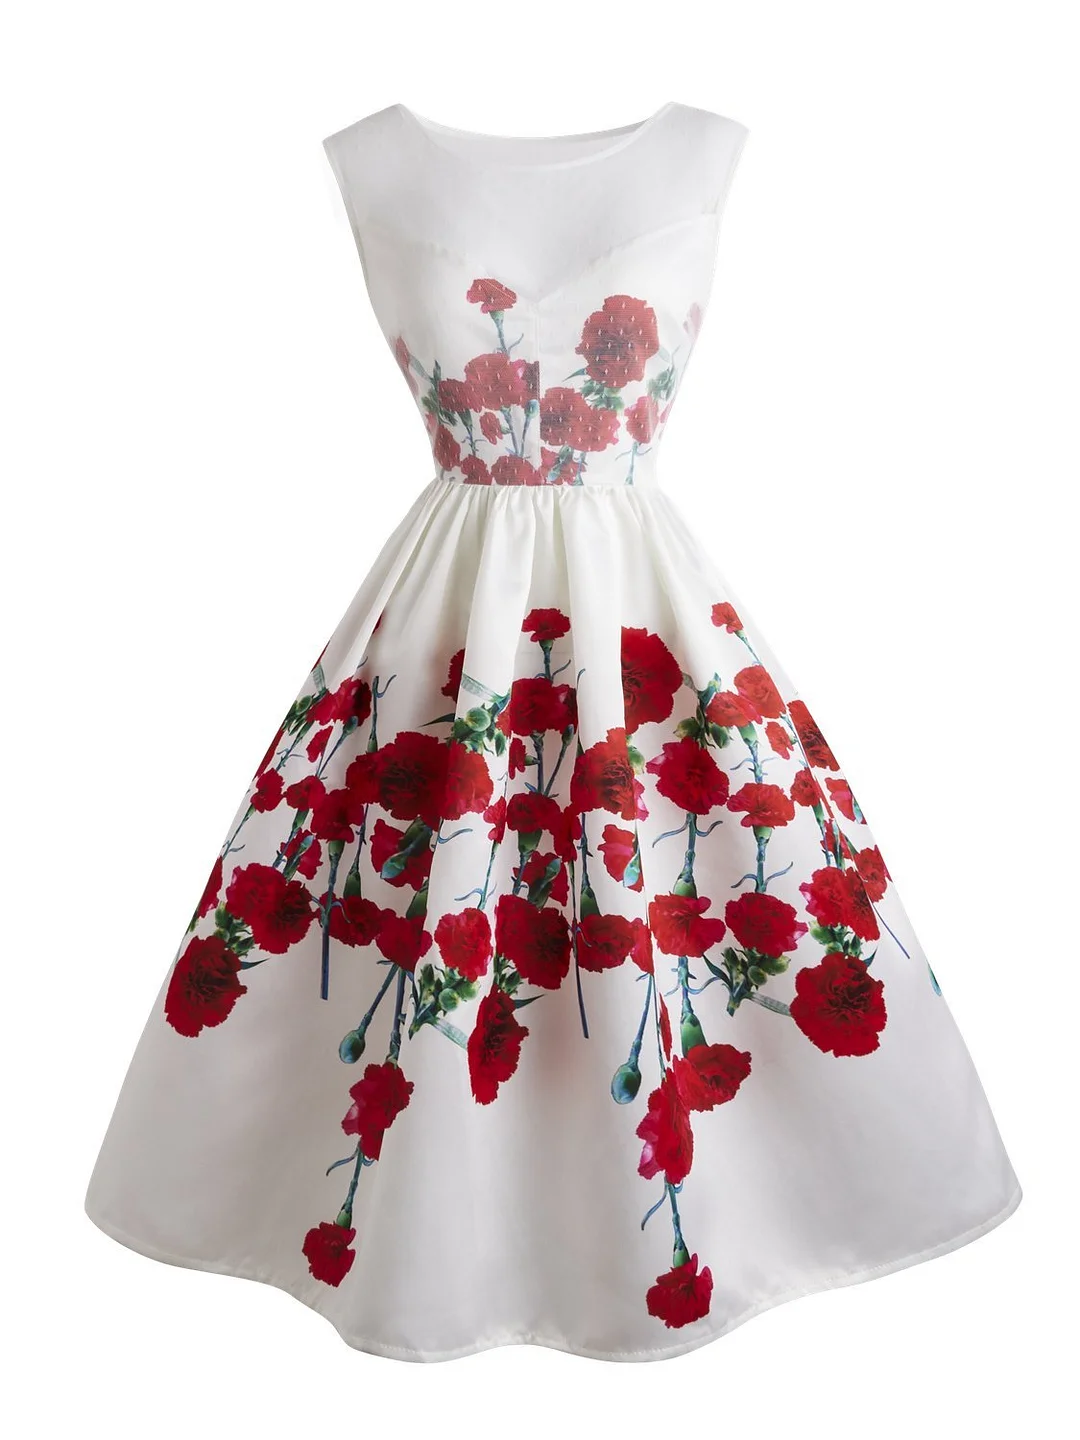 1950s Retro Style Lace Patchwork Floral Sleeveless Aline Dress